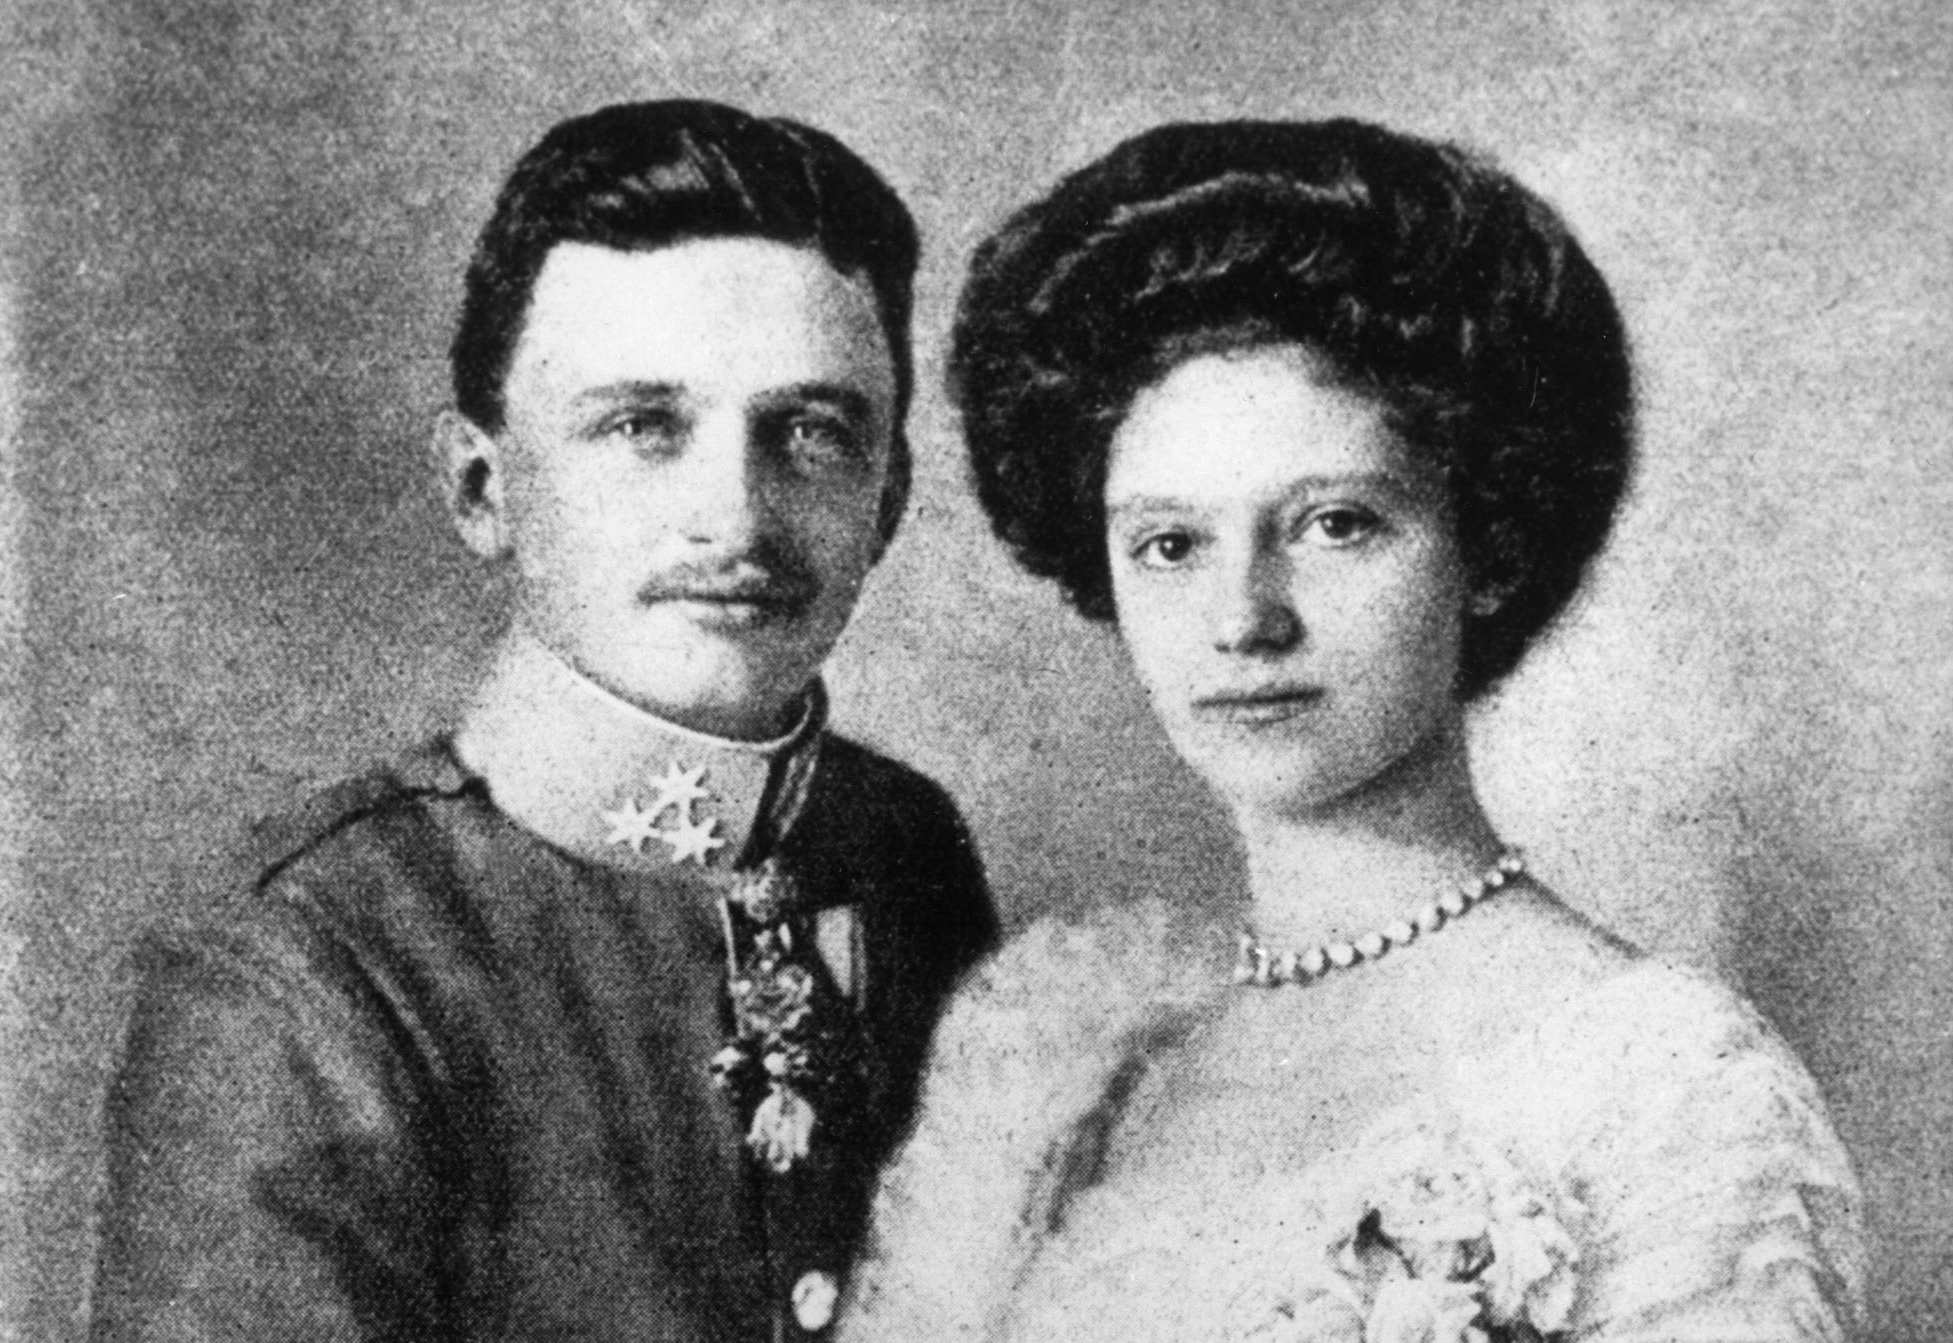 An undated file photo shows then-Archduke Karl Franz Joseph (L) of Austria, who became in 1916 Kaiser Charles I, and his wife Italian Princess Zita de Bourbon-Parme in Vienna.